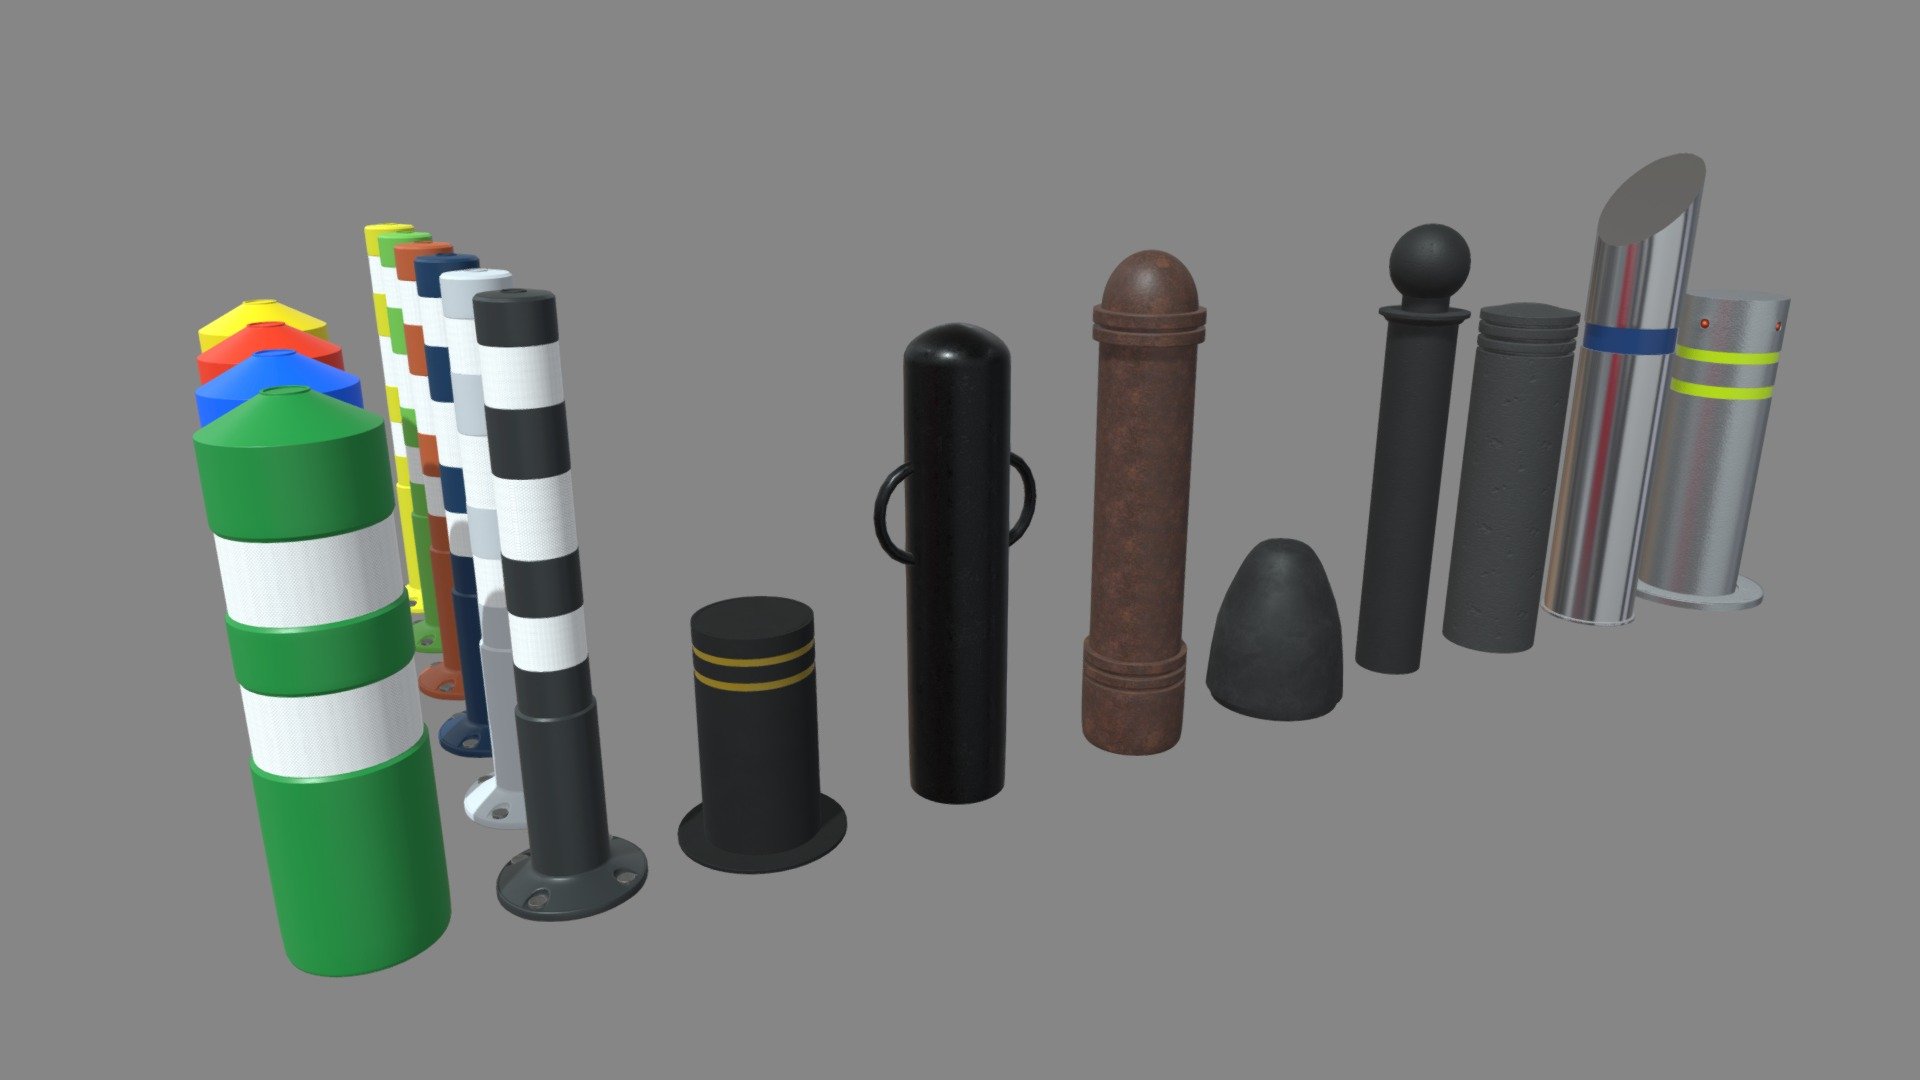 This model contains a Bollards Pack based on real bollards which i modeled in Maya 2018 and texturized in Substance Painter.

Every Bollard will have textures, fbx, obj, mb, dae, blend and substance files and will be separated in 4 different UVs.

This pack is separated in 4 UV's:

Bollards 01
Bollards 02
Bollards 03 04 05 06
Bollards 07 08 09 010

These models will be part of a huge city elements pack which will be added as a big pack and separately on my profile.

If you need any kind of help contact me, i will help you with everything i can. If you like the model please give me some feedback, I would appreciate it.

Don’t doubt on contacting me, i would be very happy to help. If you experience any kind of difficulties, be sure to contact me and i will help you. Sincerely Yours, ViperJr3D - Bollards Pack - Buy Royalty Free 3D model by ViperJr3D 3d model